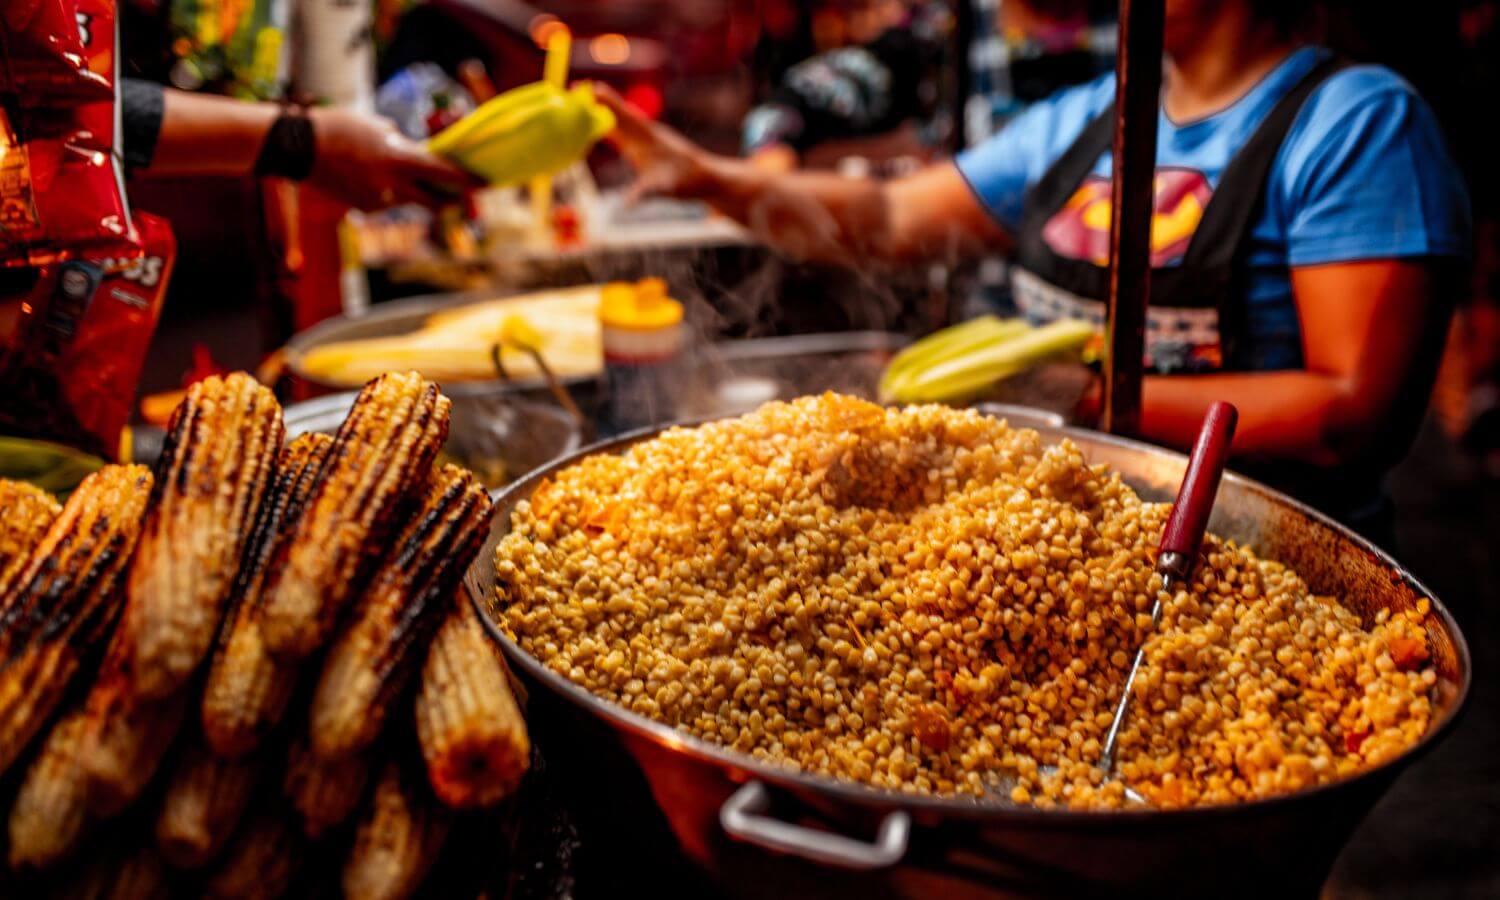 Cooked corn on the cob being served at the Feria del Maíz y la Tortilla.